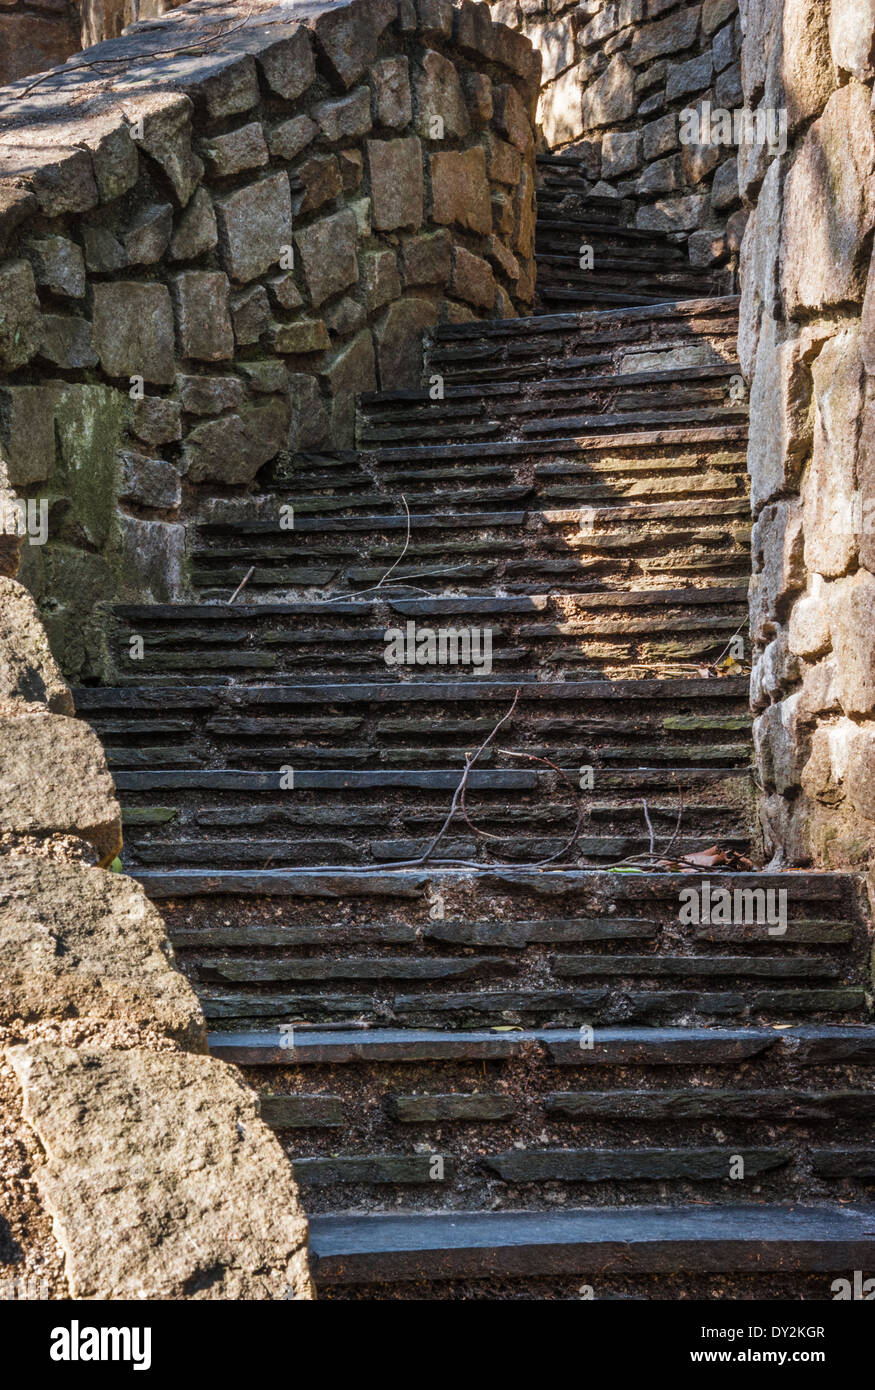 Old stone steps winding upward in the dappled sunlight of early morning. Stock Photo